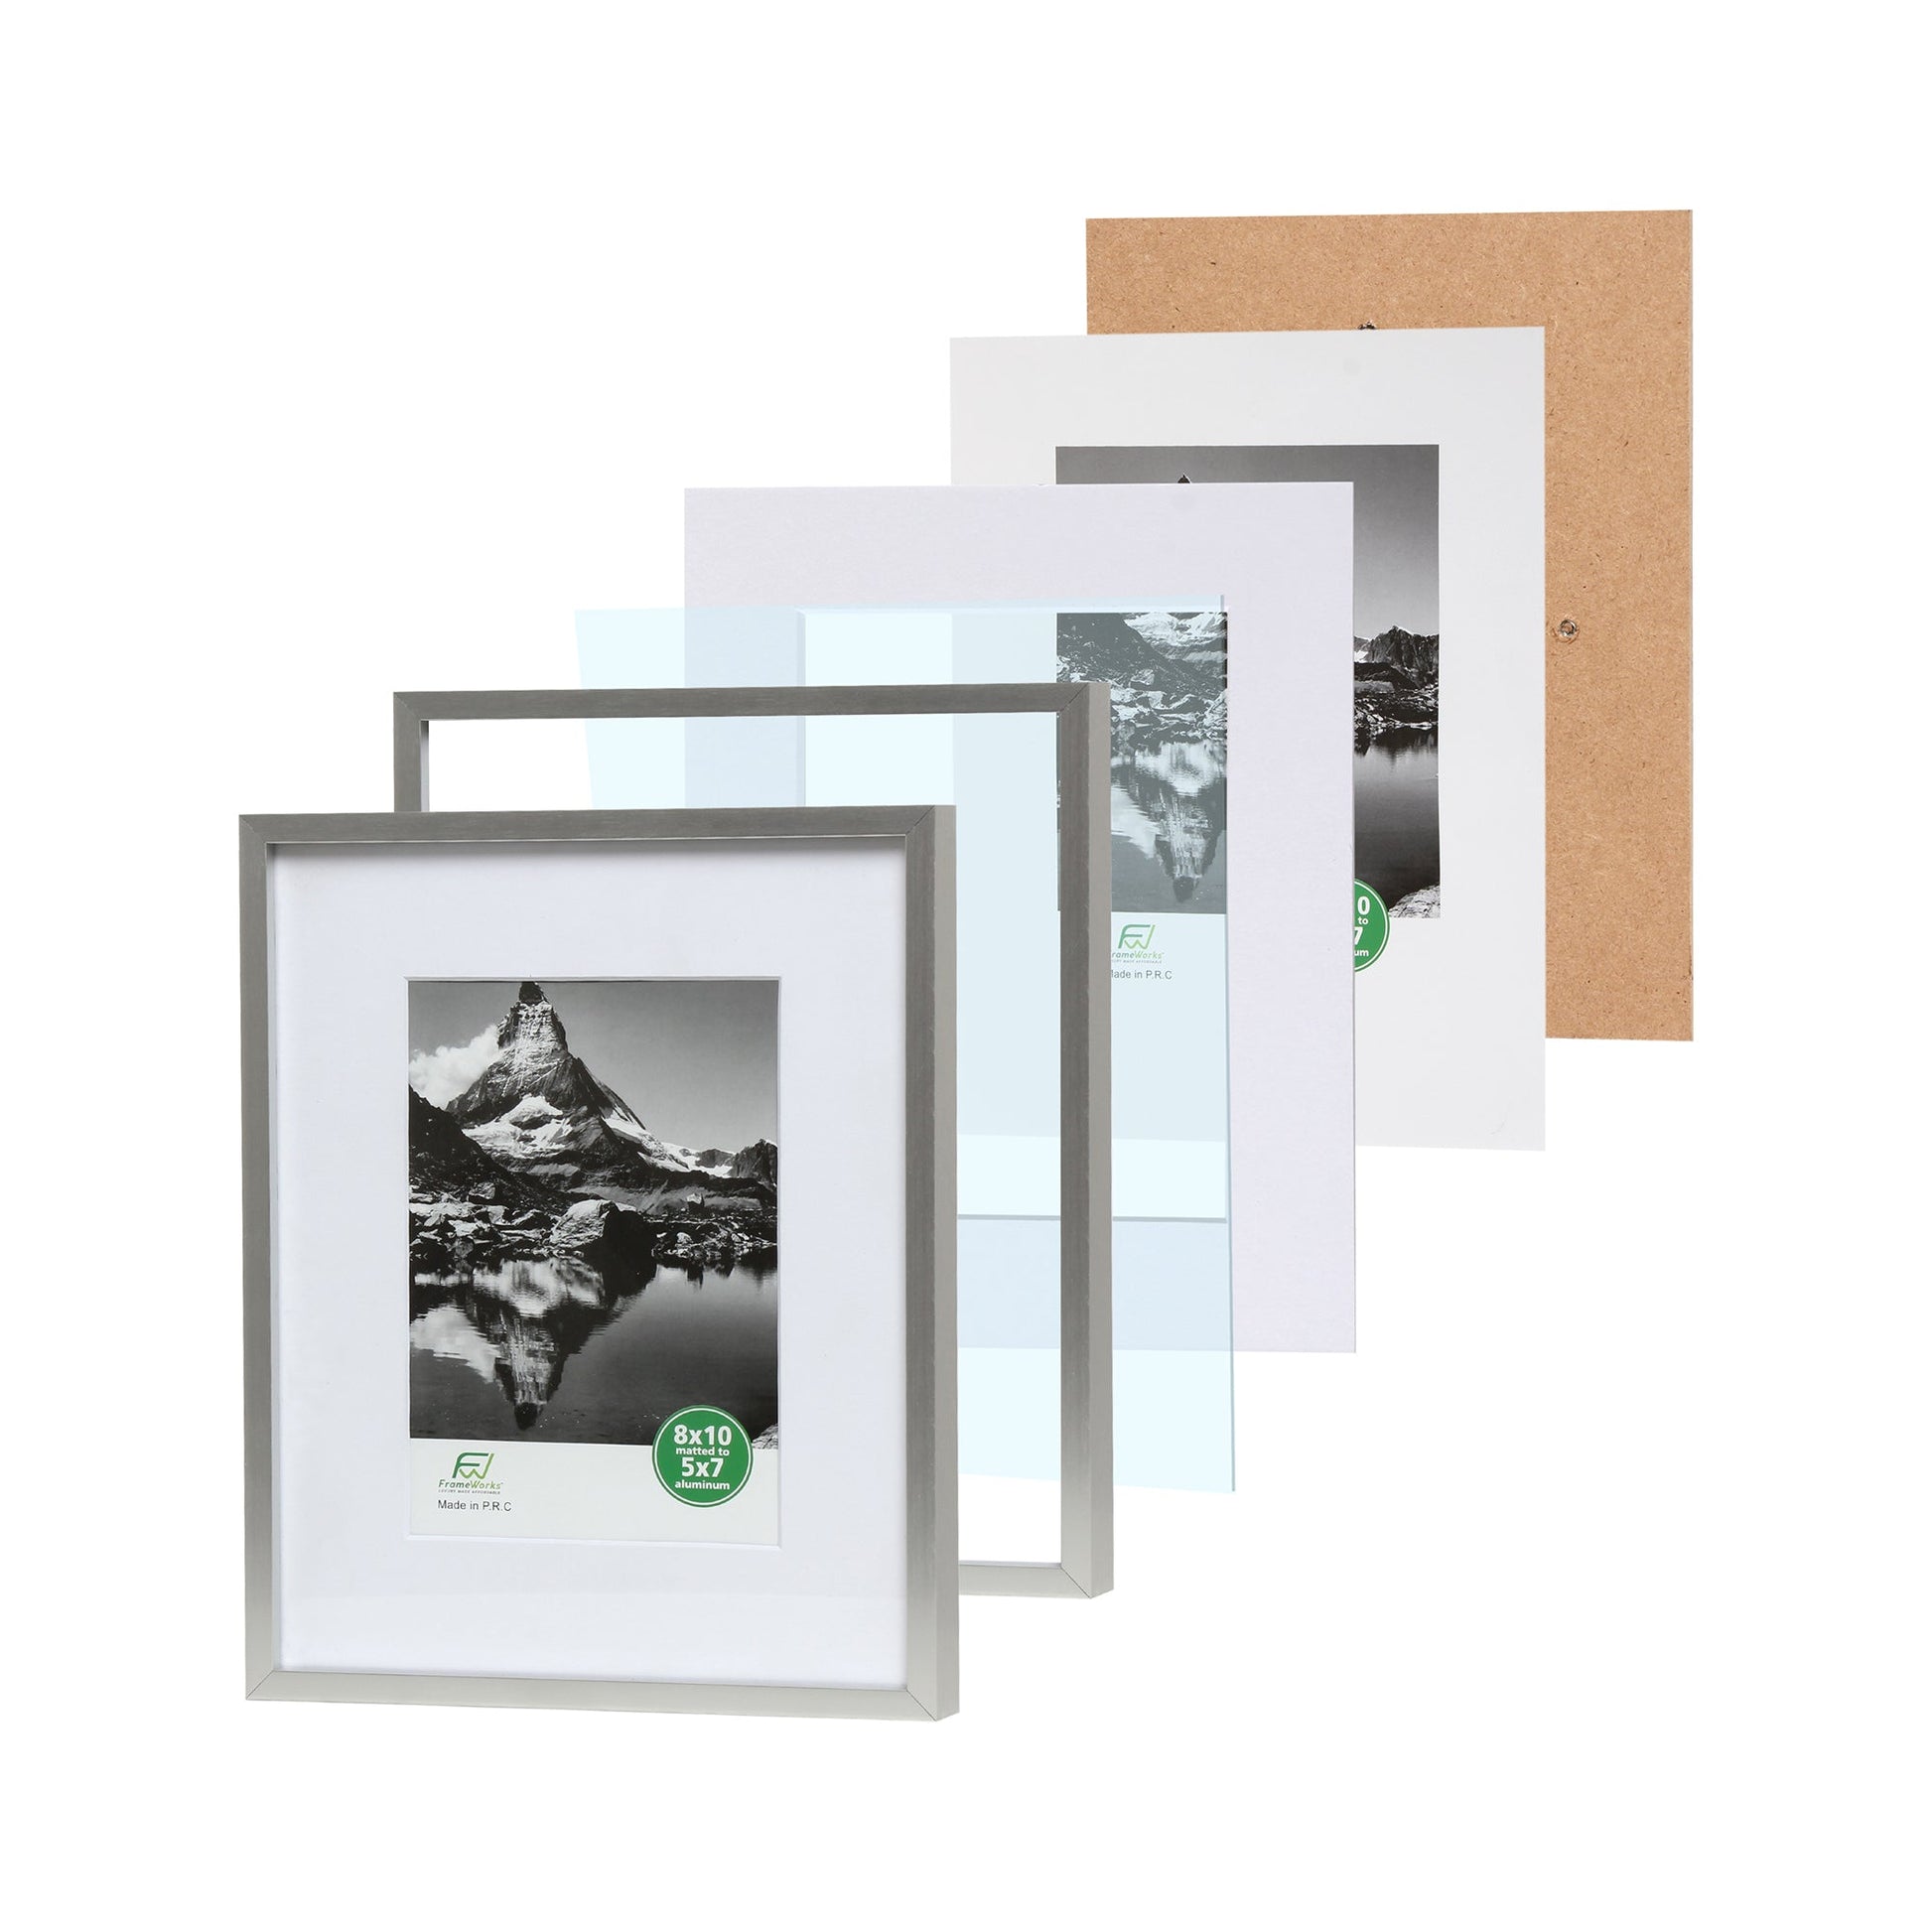 8" x 10" Deluxe Silver Aluminum Contemporary Picture Frame, 5" x 7" Matted